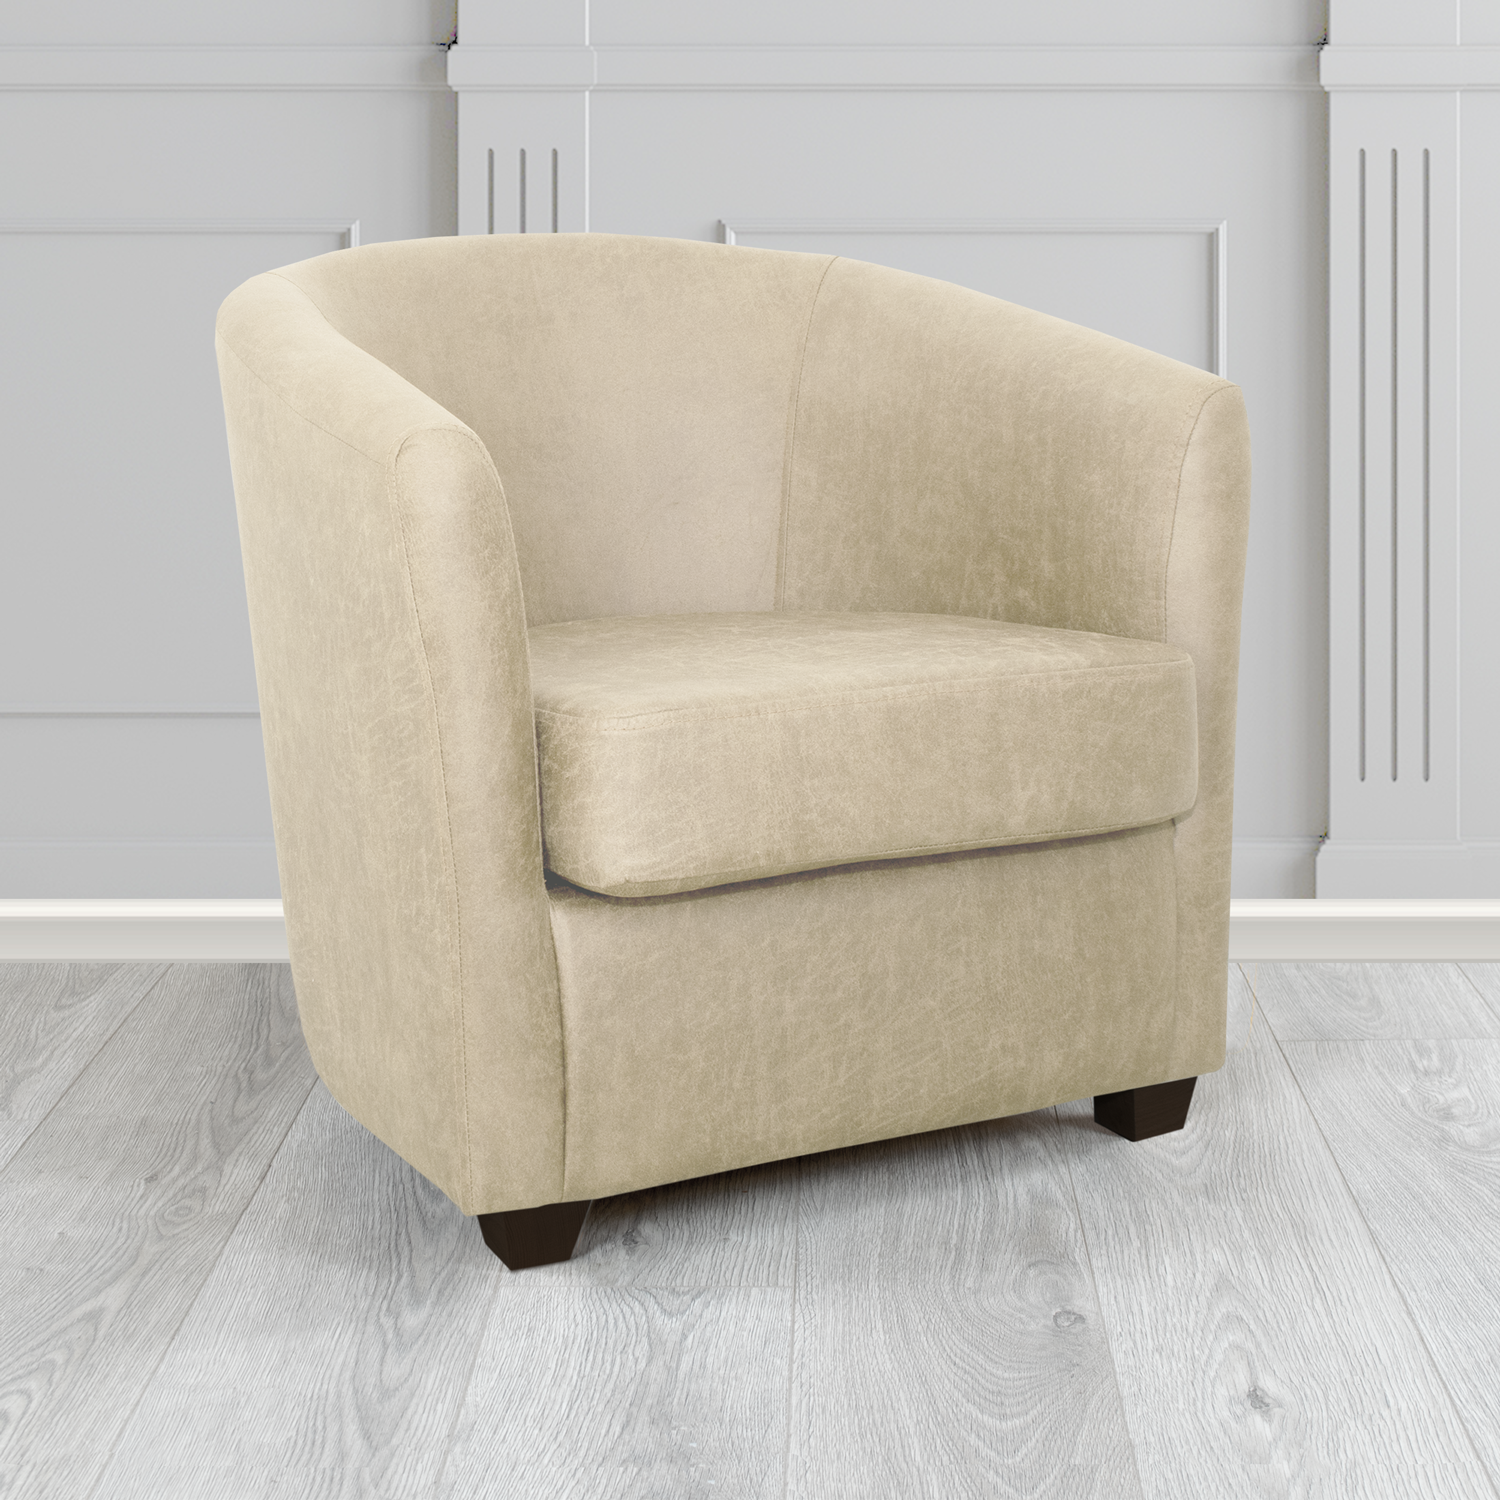 Cannes Tub Chair in Nevada Beige Faux Leather - The Tub Chair Shop